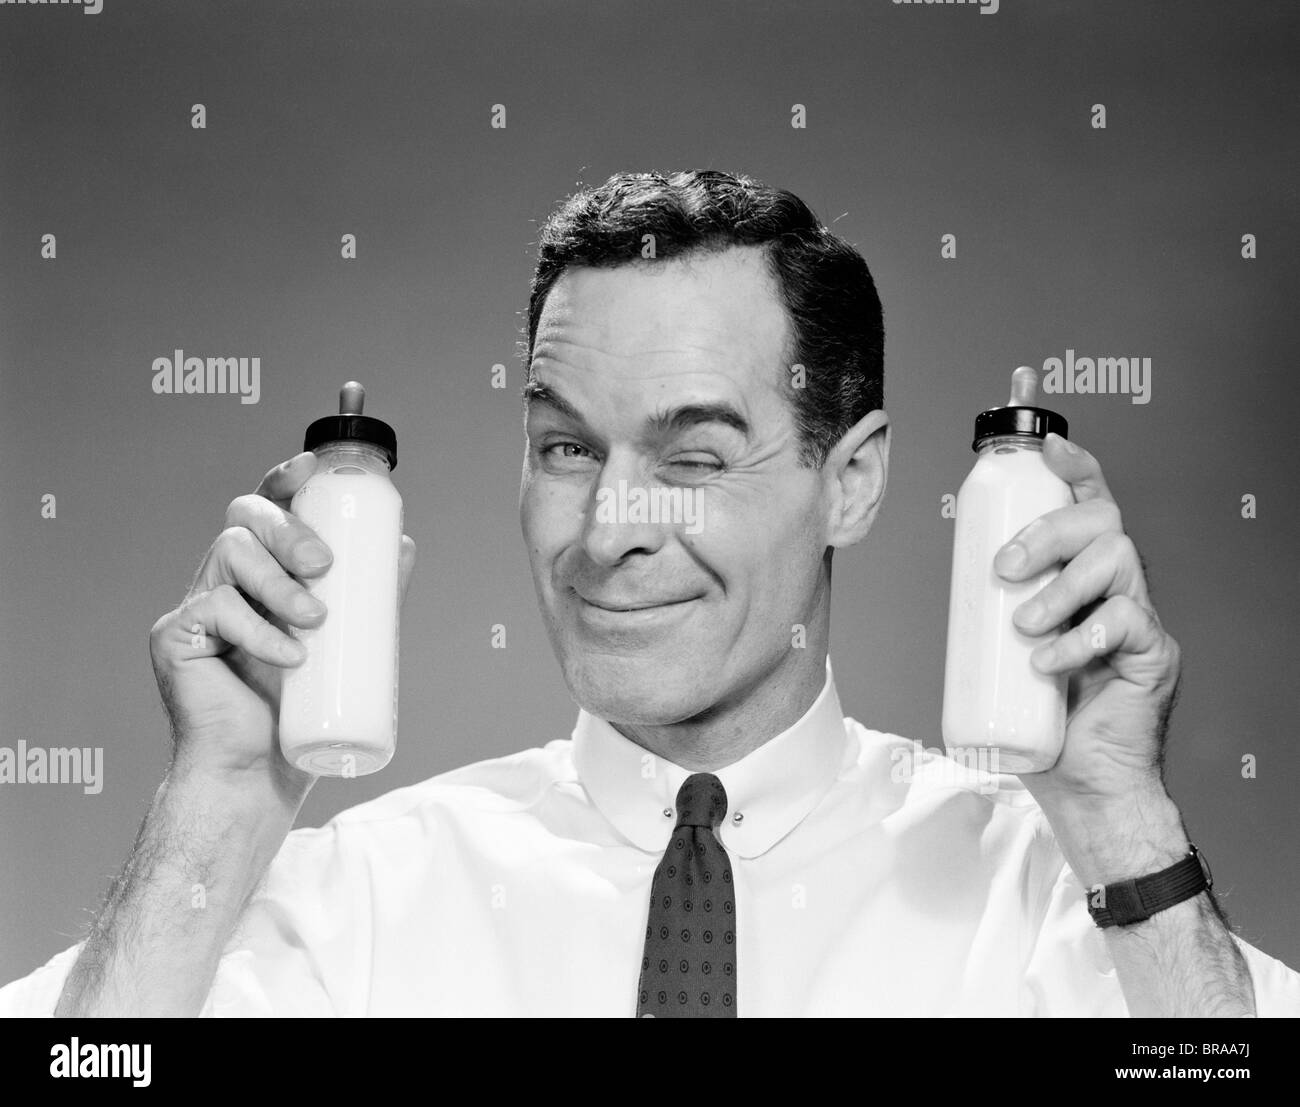 1960s MAN IN SHIRT AND TIE WINKING AT CAMERA HOLDING TWO BABY MILK BOTTLES Stock Photo